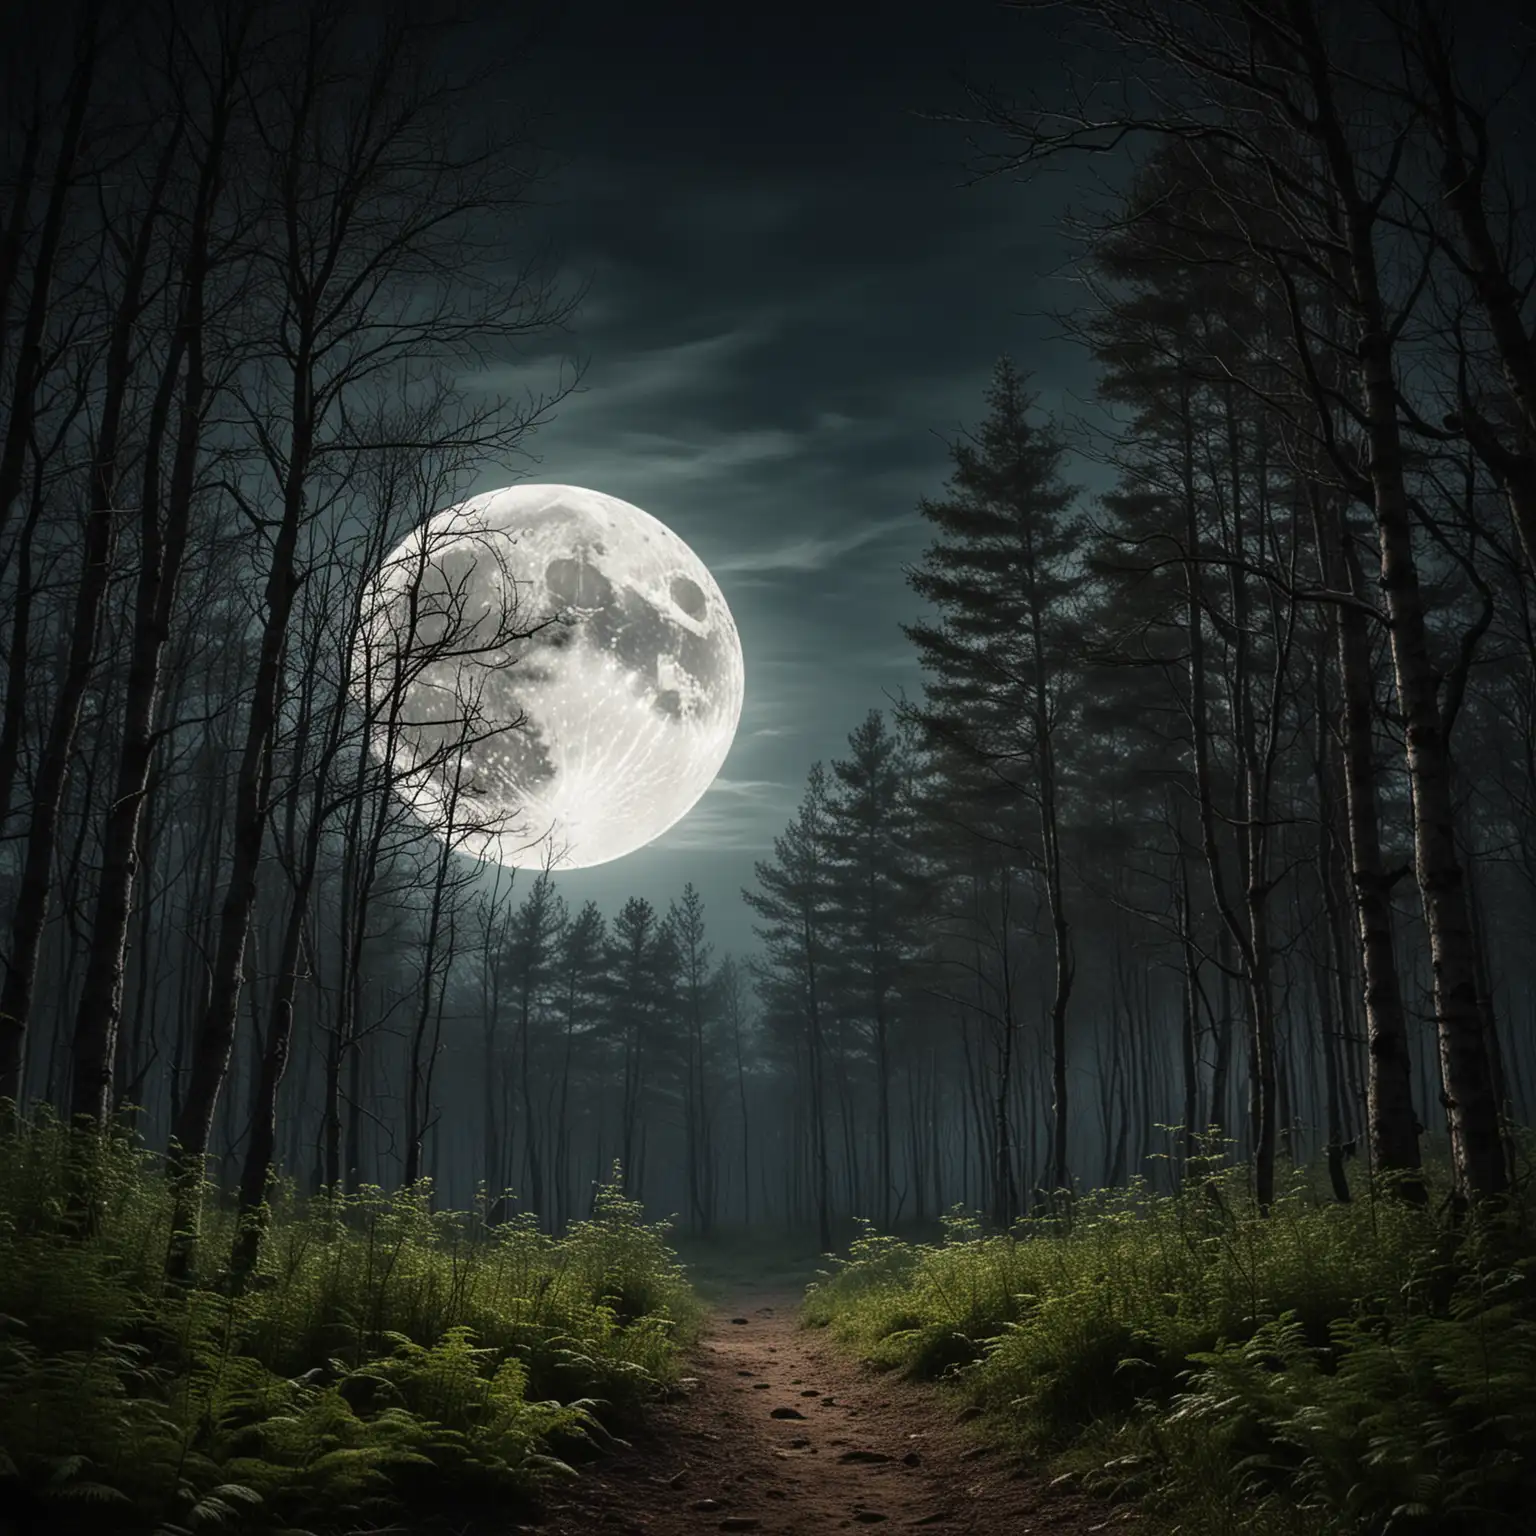 Forest background with a full moon
